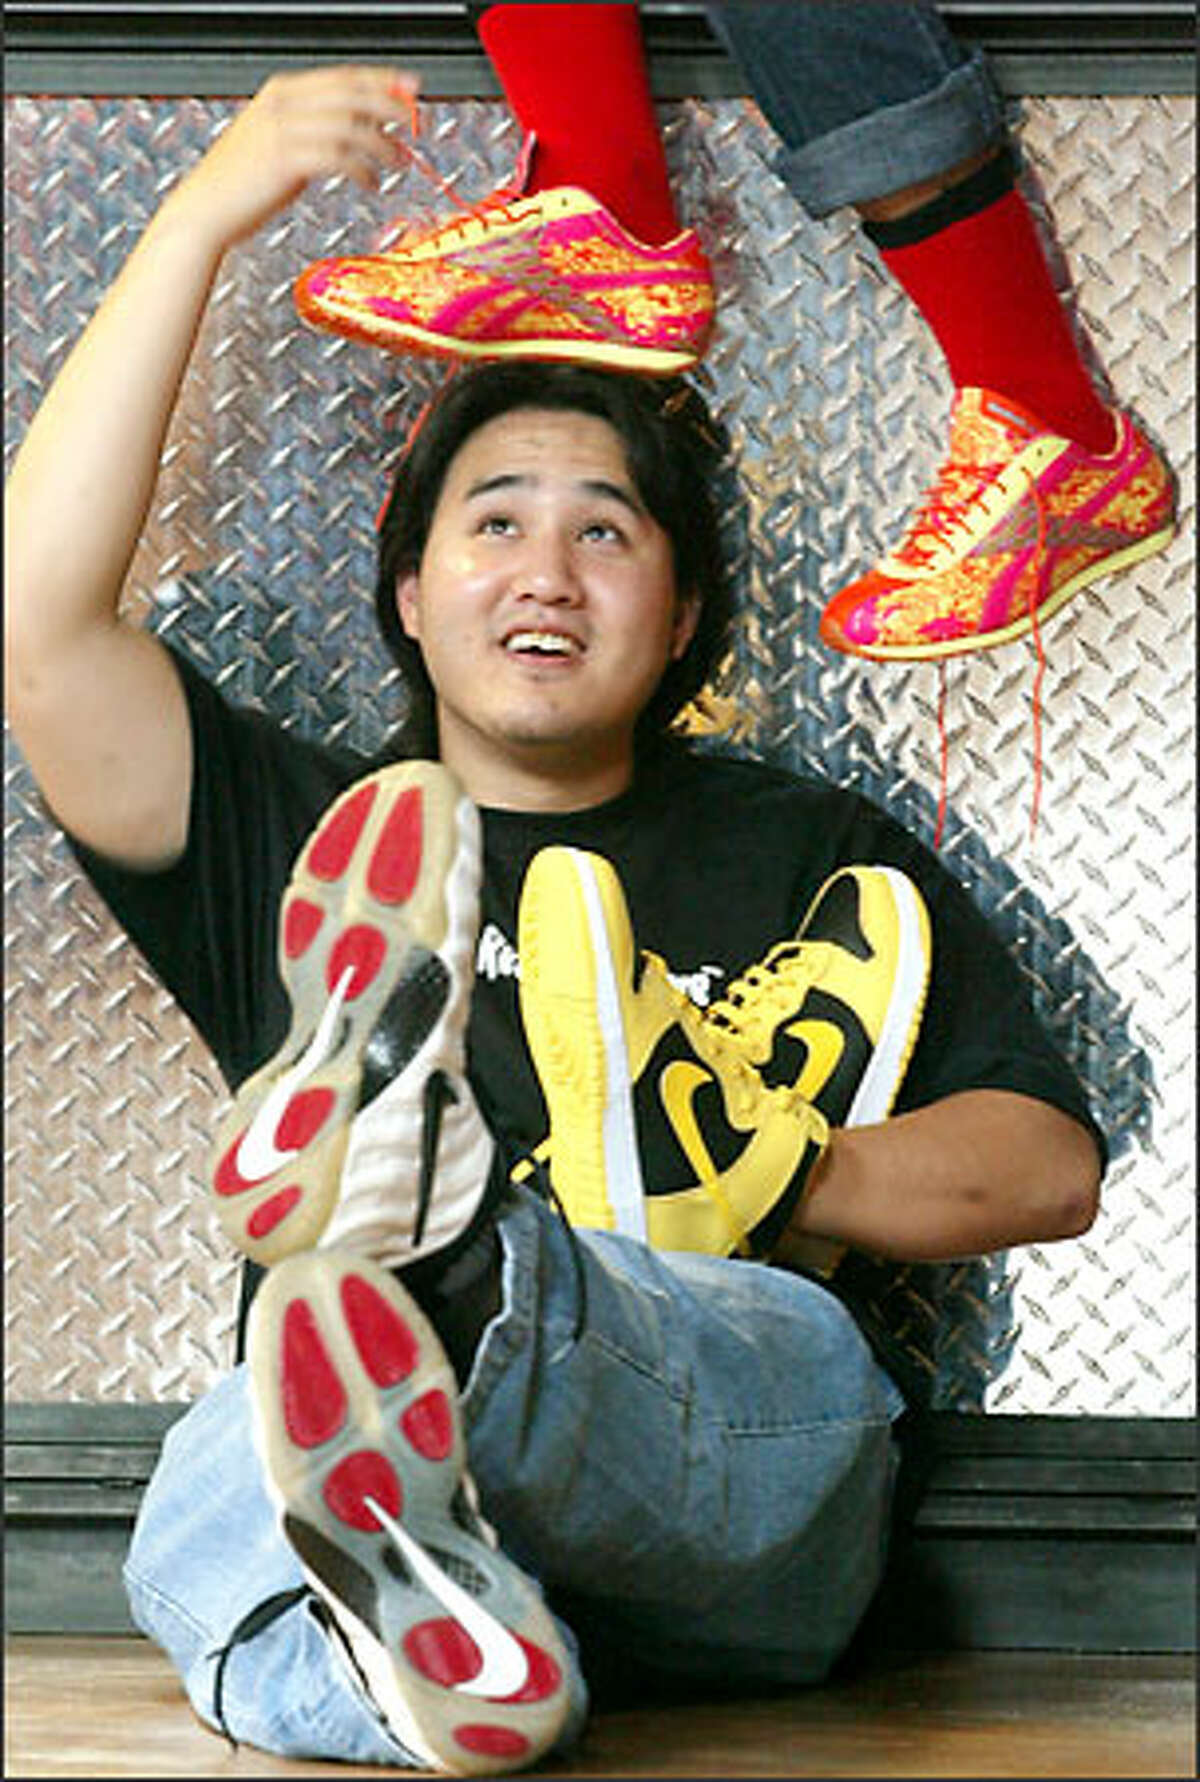 Mark Shin with sneakers from his collection: orange-and-yellow Reebok Gold Medalists, yellow Nike Dunk NYCs and, on his feet, Nike Air Foamposites.